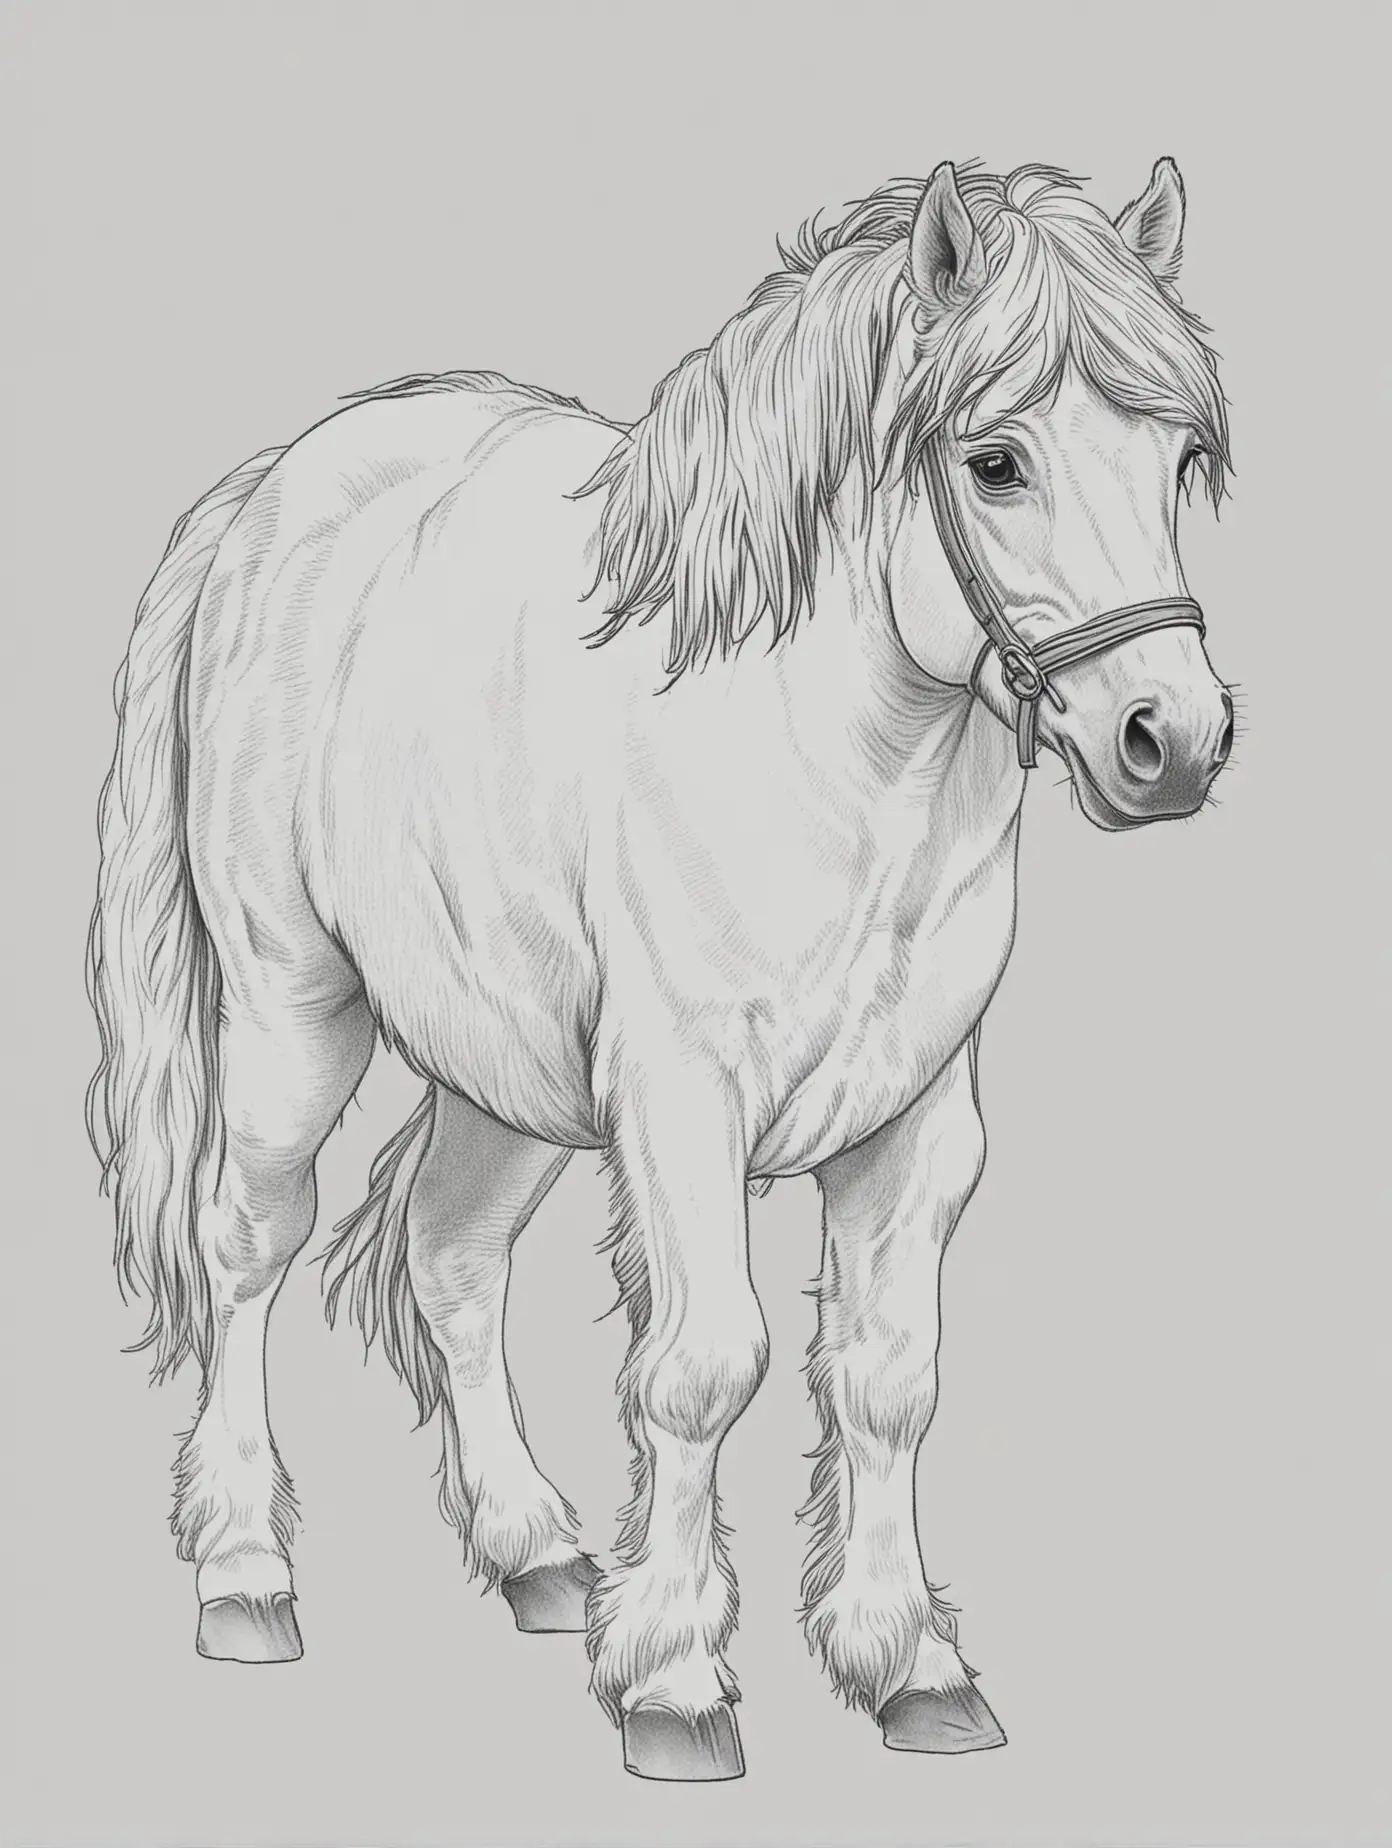 Outline of a shetland pony for a children's colouring book, no background